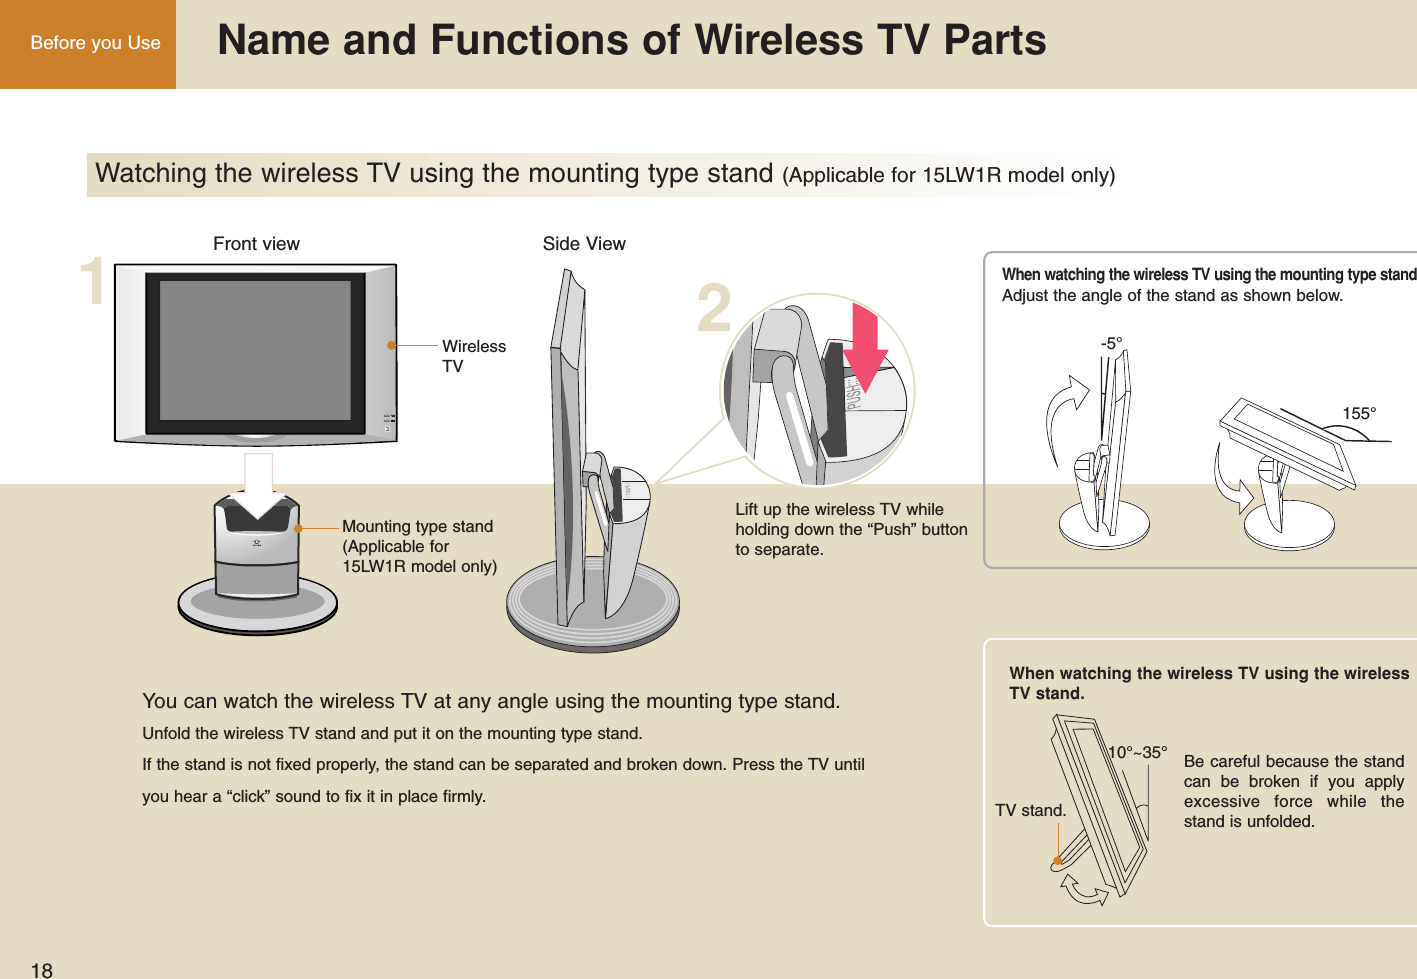 18Before you Use  Name and Functions of Wireless TV PartsWatching the wireless TV using the mounting type stand (Applicable for 15LW1R model only)12Front view Side ViewWirelessTVMounting type stand(Applicable for15LW1R model only)Lift up the wireless TV whileholding down the “Push” buttonto separate.You can watch the wireless TV at any angle using the mounting type stand.Unfold the wireless TV stand and put it on the mounting type stand.If the stand is not fixed properly, the stand can be separated and broken down. Press the TV untilyou hear a “click” sound to fix it in place firmly.10°~35°TV stand.Adjust the angle of the stand as shown below.Be careful because the standcan be broken if you applyexcessive force while thestand is unfolded.When watching the wireless TV using the wirelessTV stand.When watching the wireless TV using the mounting type stand155°-5°